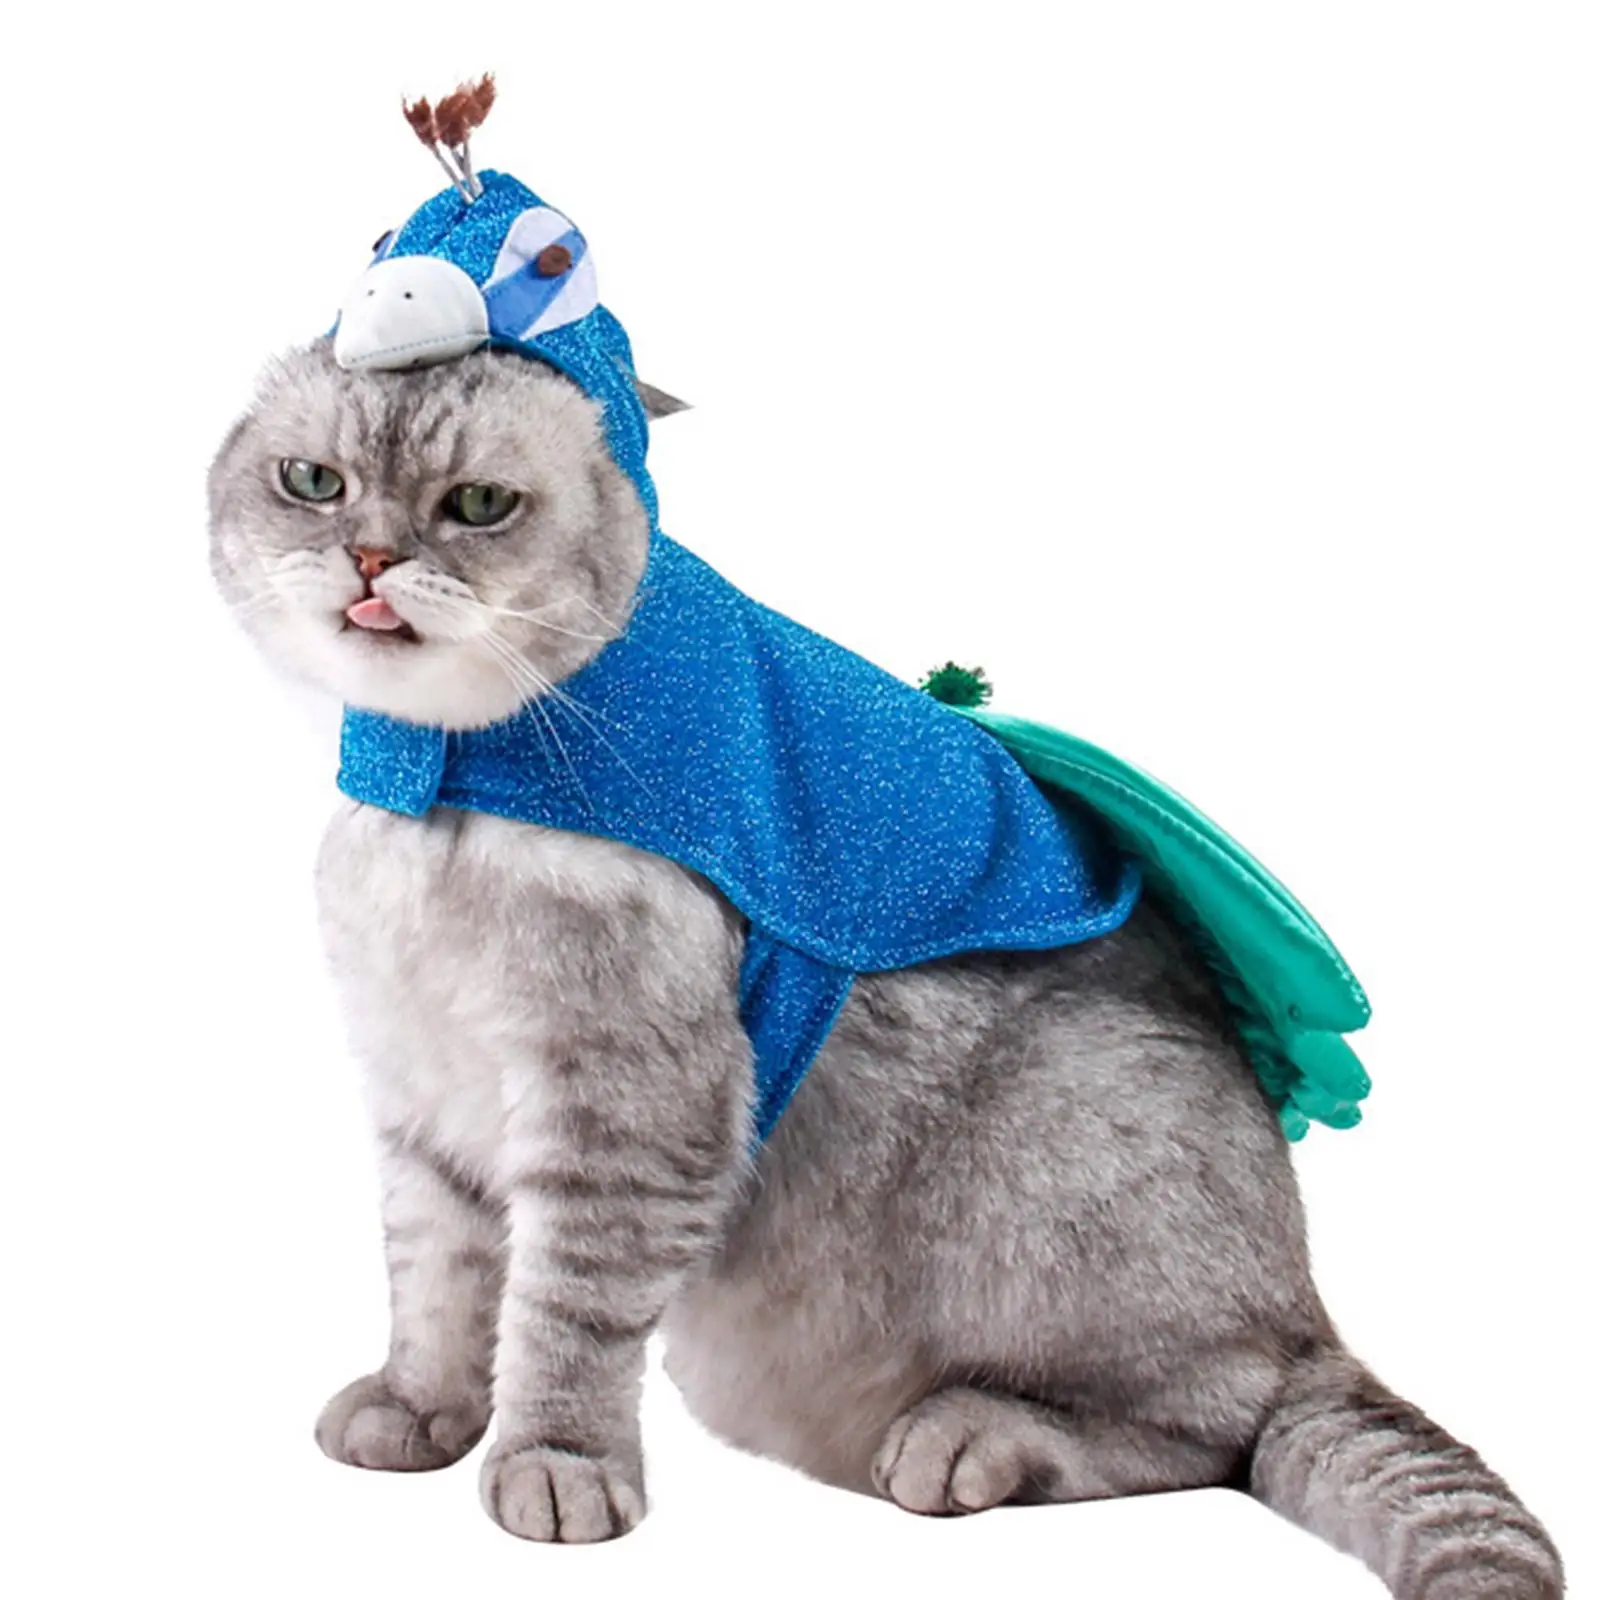 Funny Cat Peacock Costume Hat Apparel Breathable Coat Soft Jacket Outfit Pet Clothes for Kitten Festival Easter Cosplay